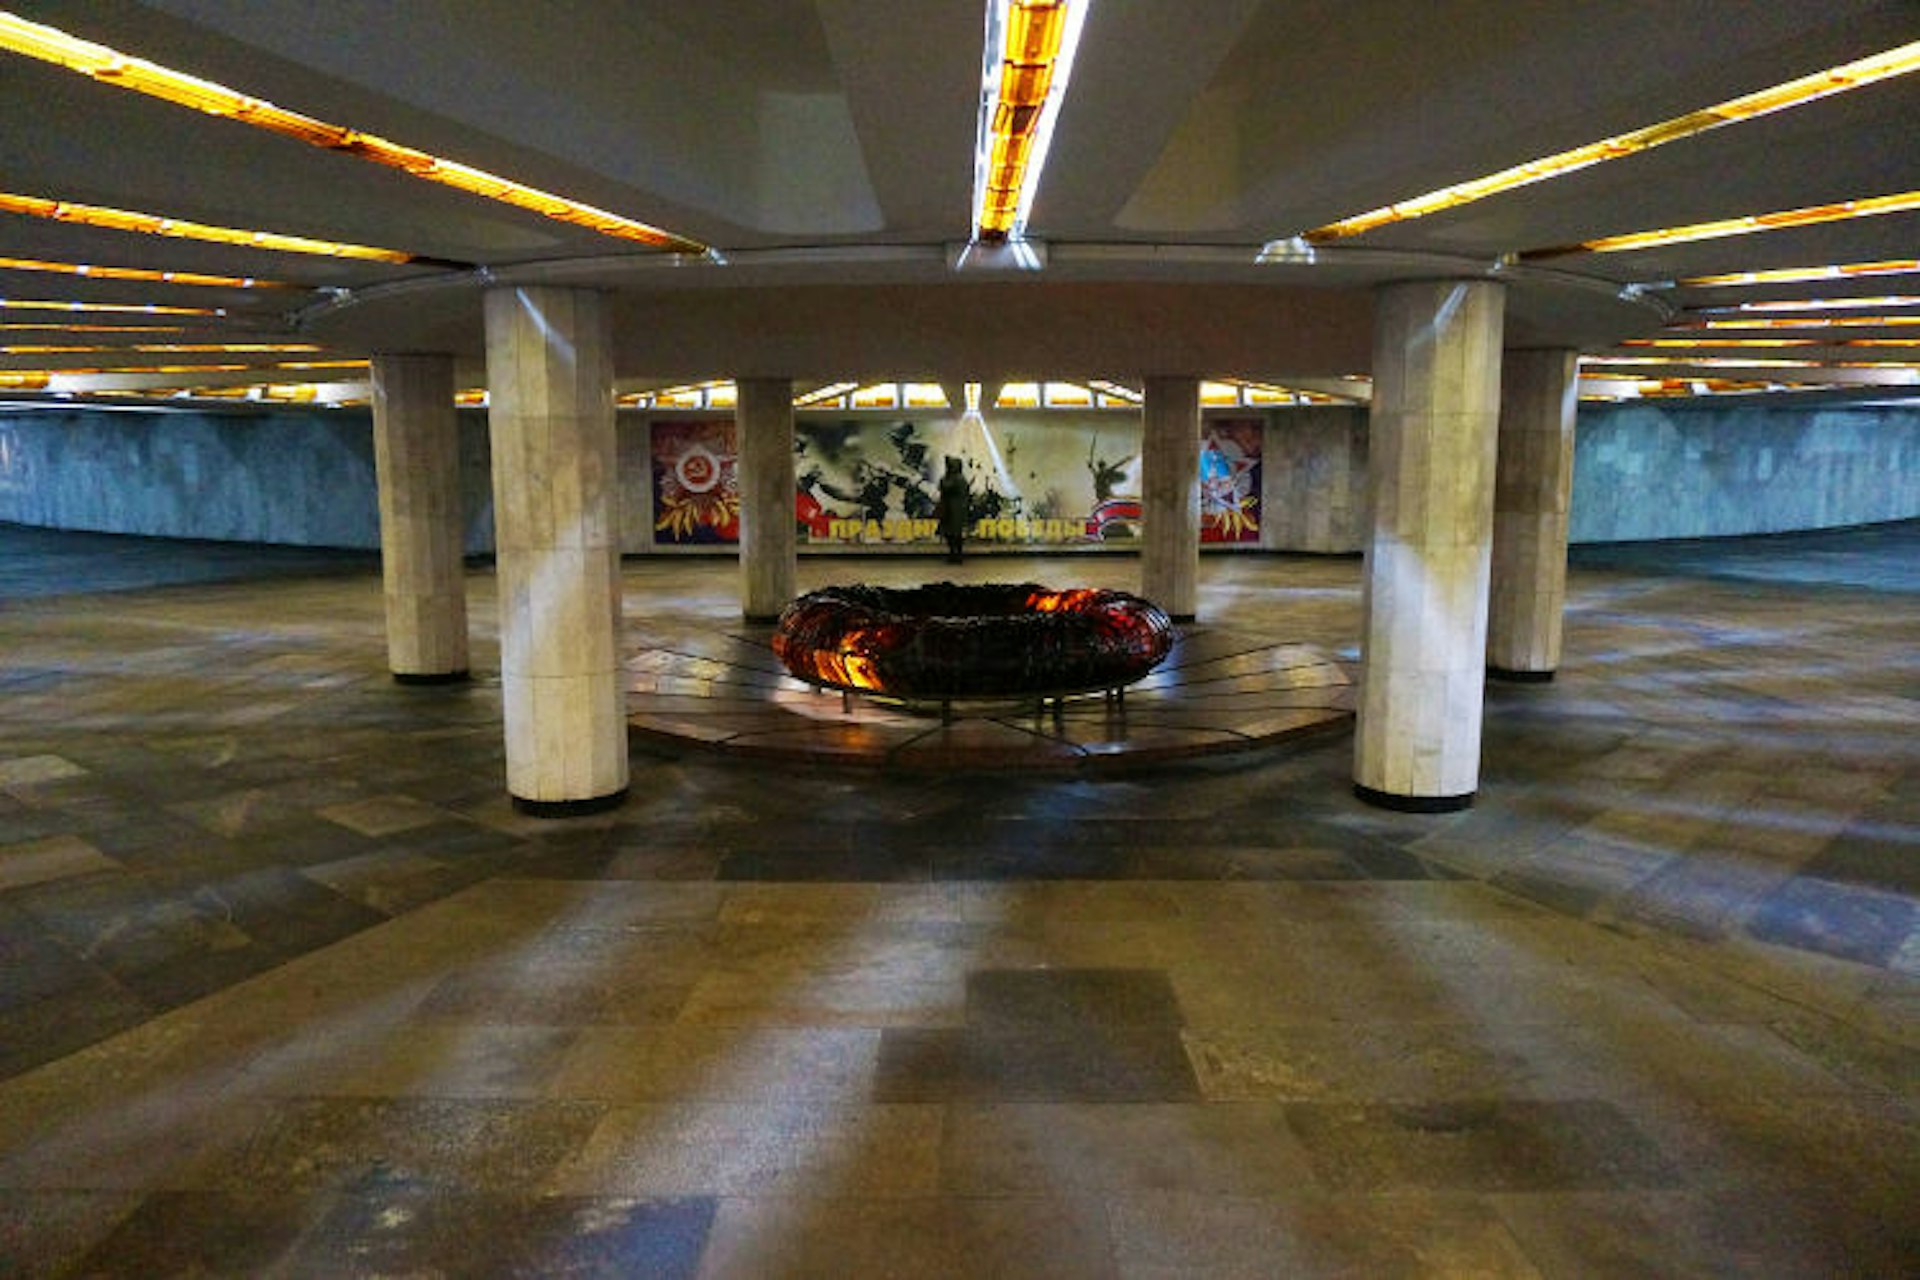 Memorial hall beneath Minsk's Eternal Flame monument. Image by Anita Isalska / Lonely Planet